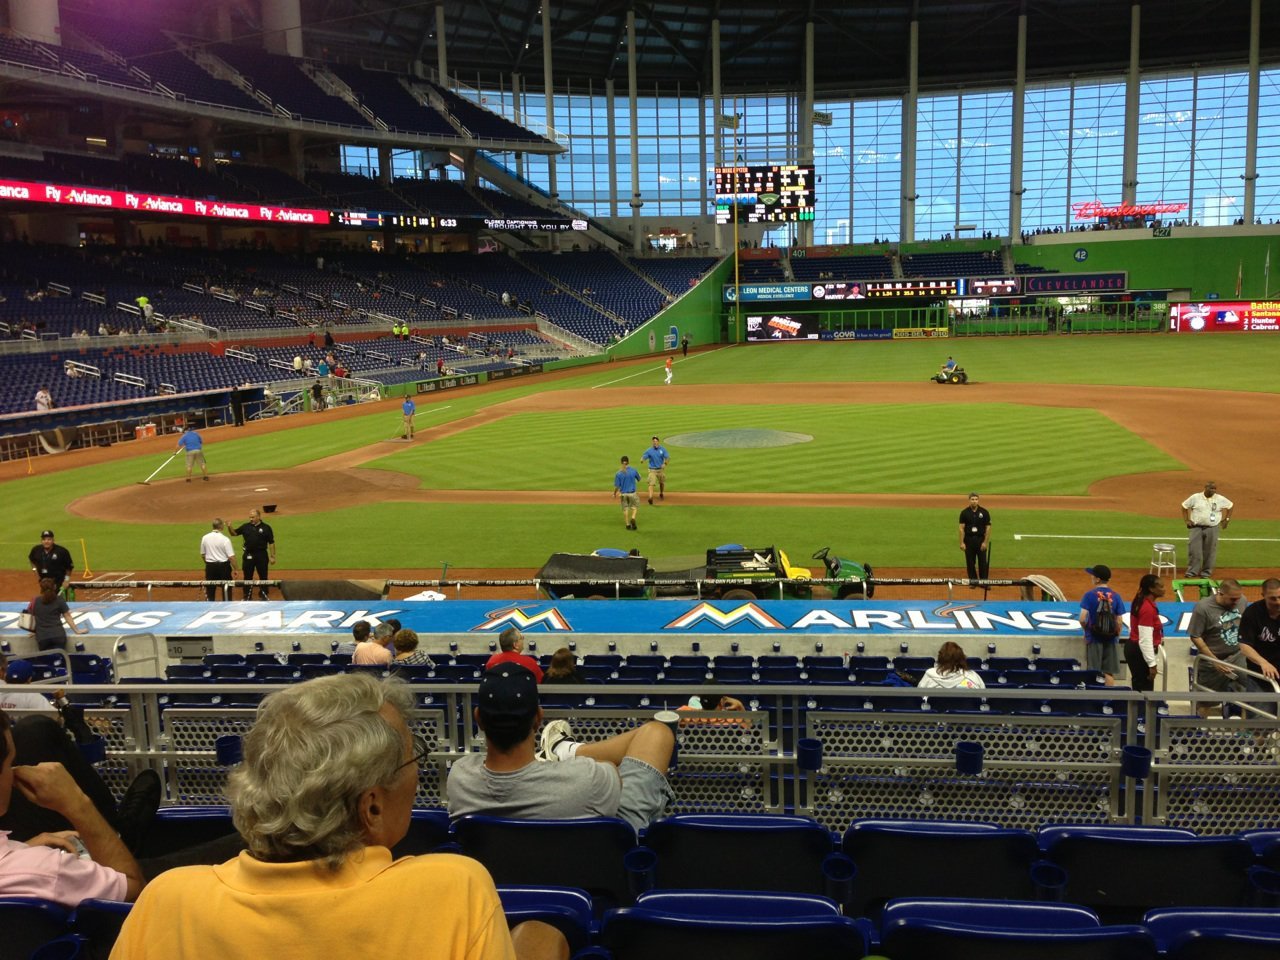 Marlins Park Seating Chart With Seat Numbers